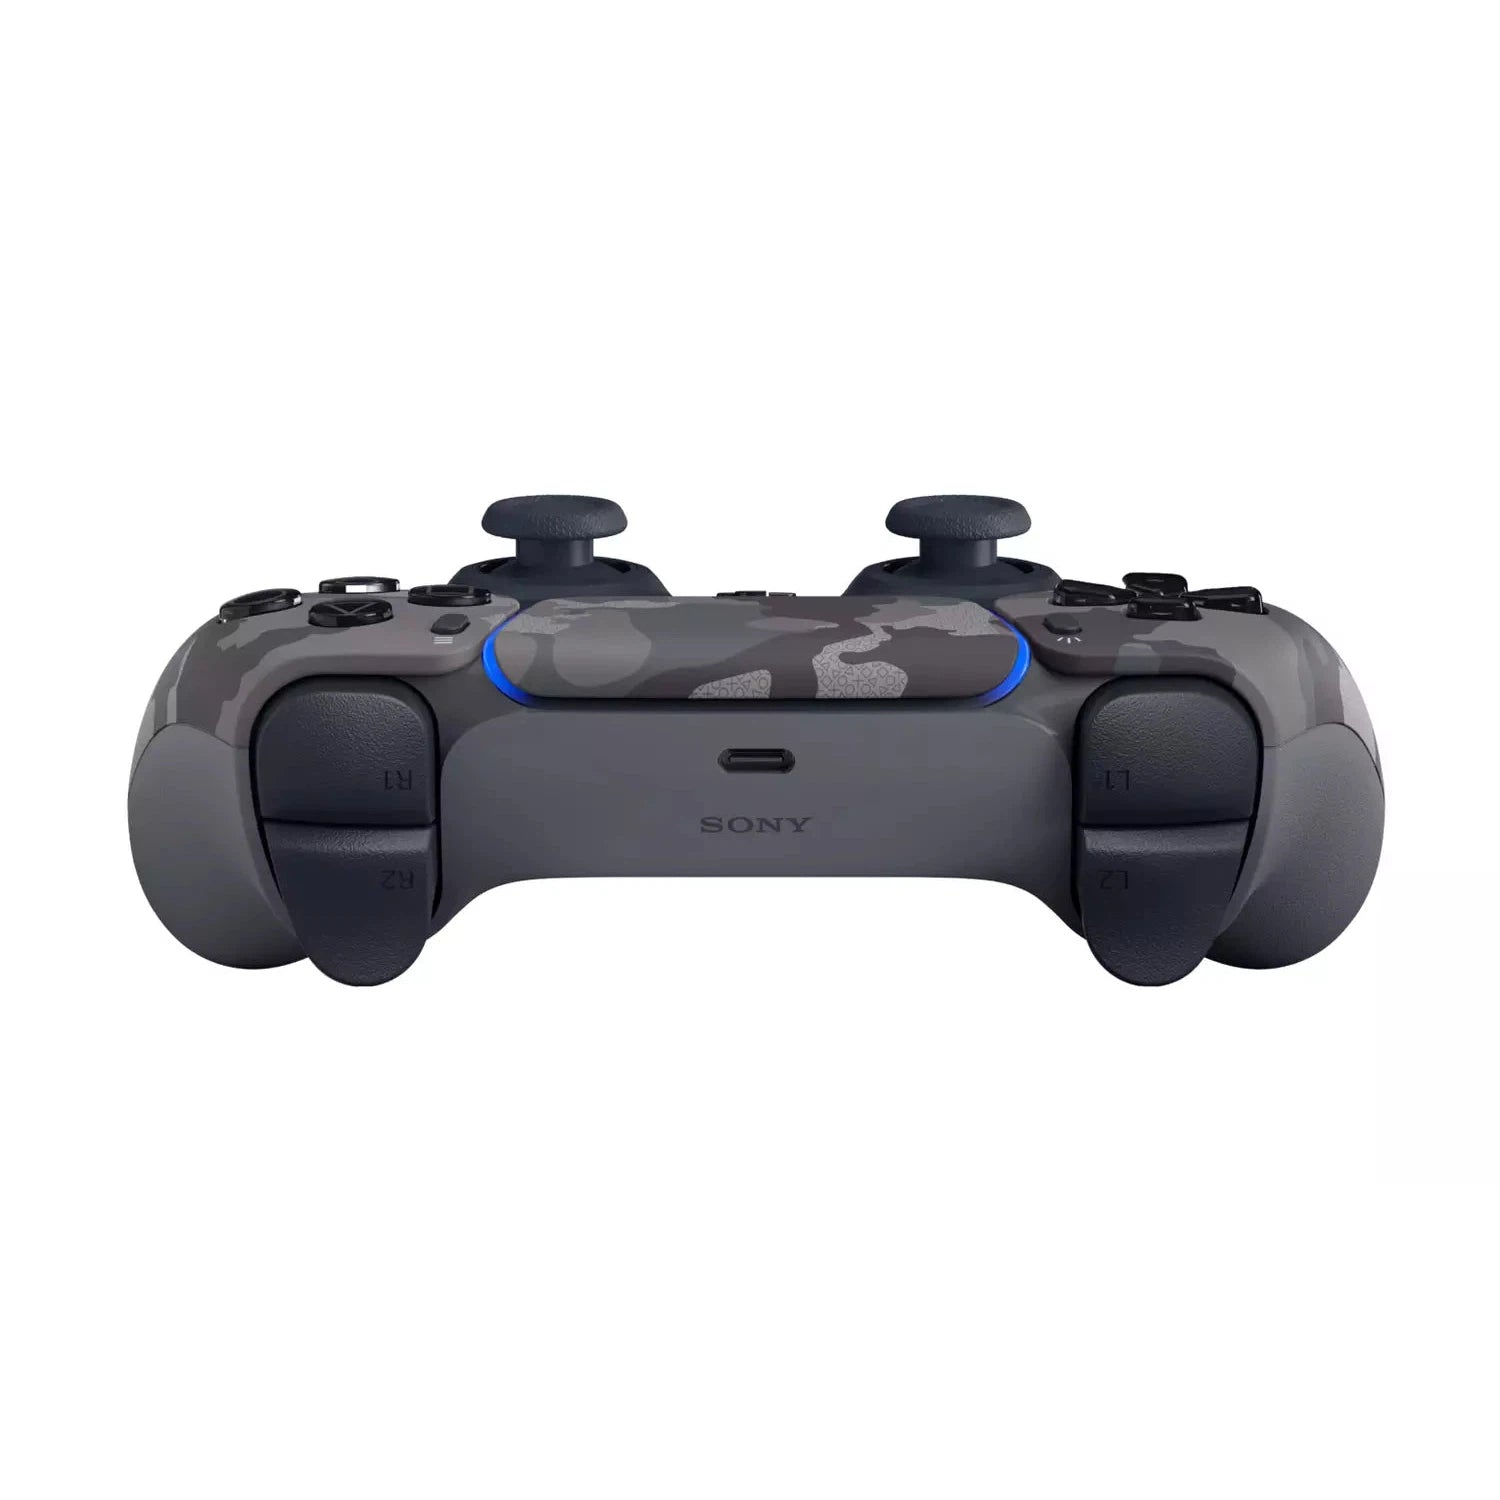 Sony PS5 DualSense Controller - Grey Camouflage - Refurbished Pristine